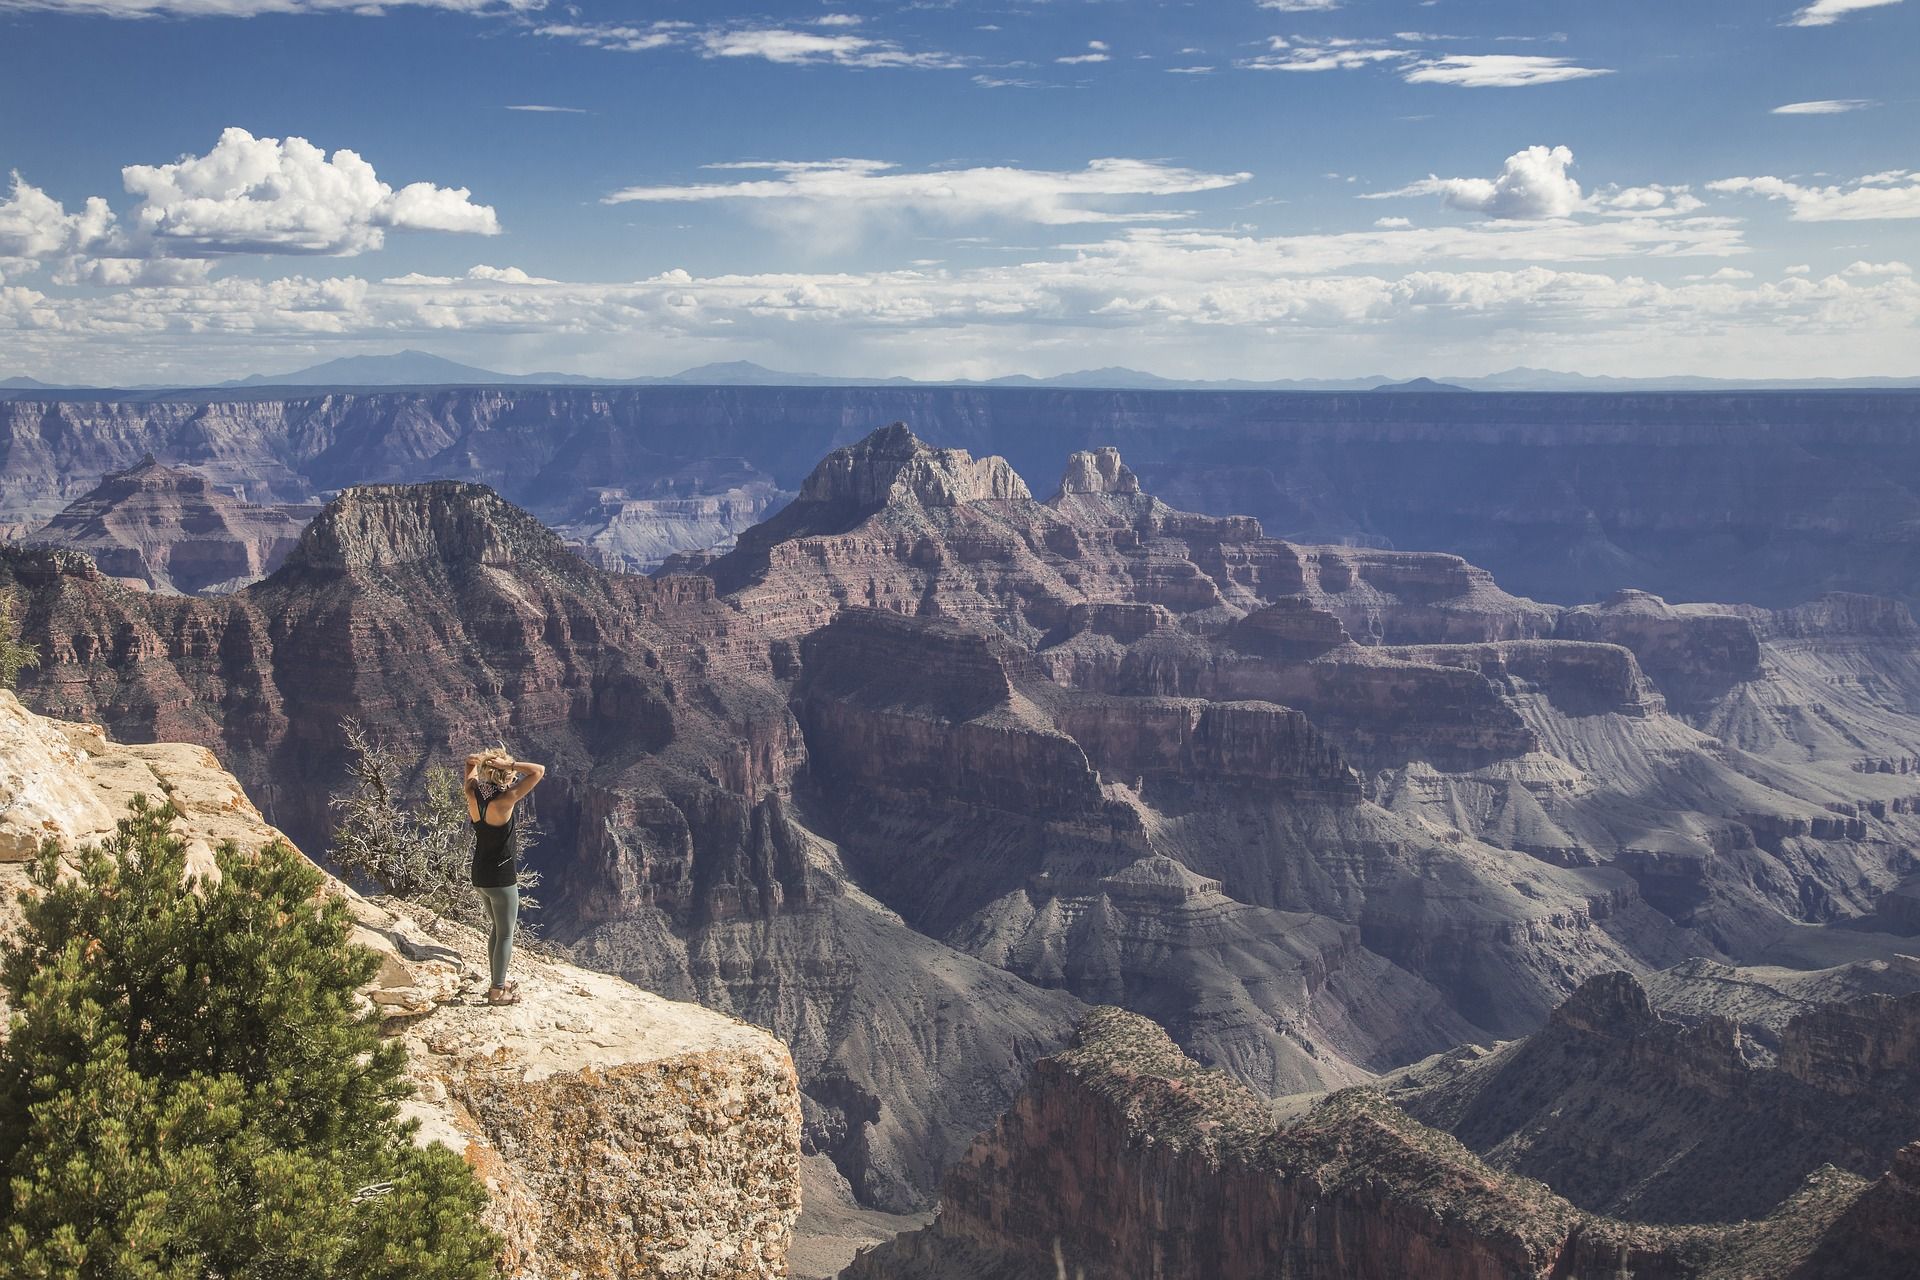 Stunning views of The Grand Canyon